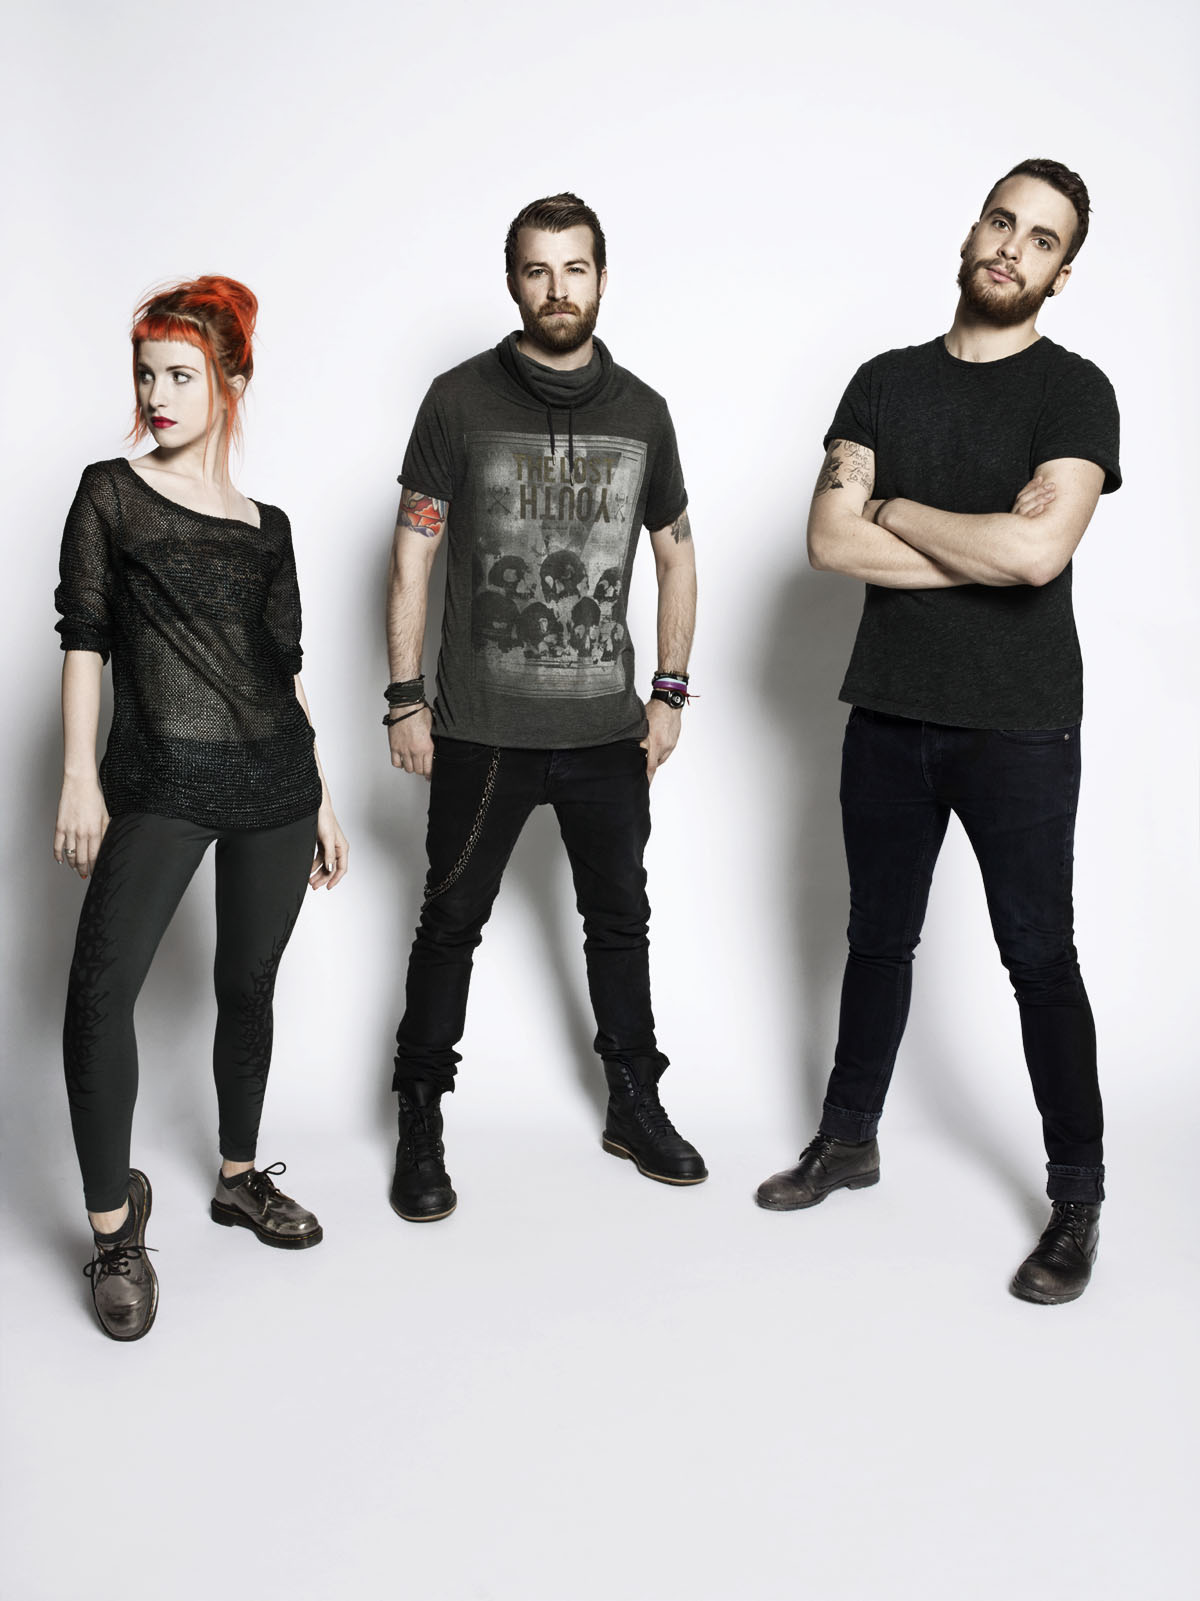 Interview: Paramore's Hayley Williams on their self-titled album +